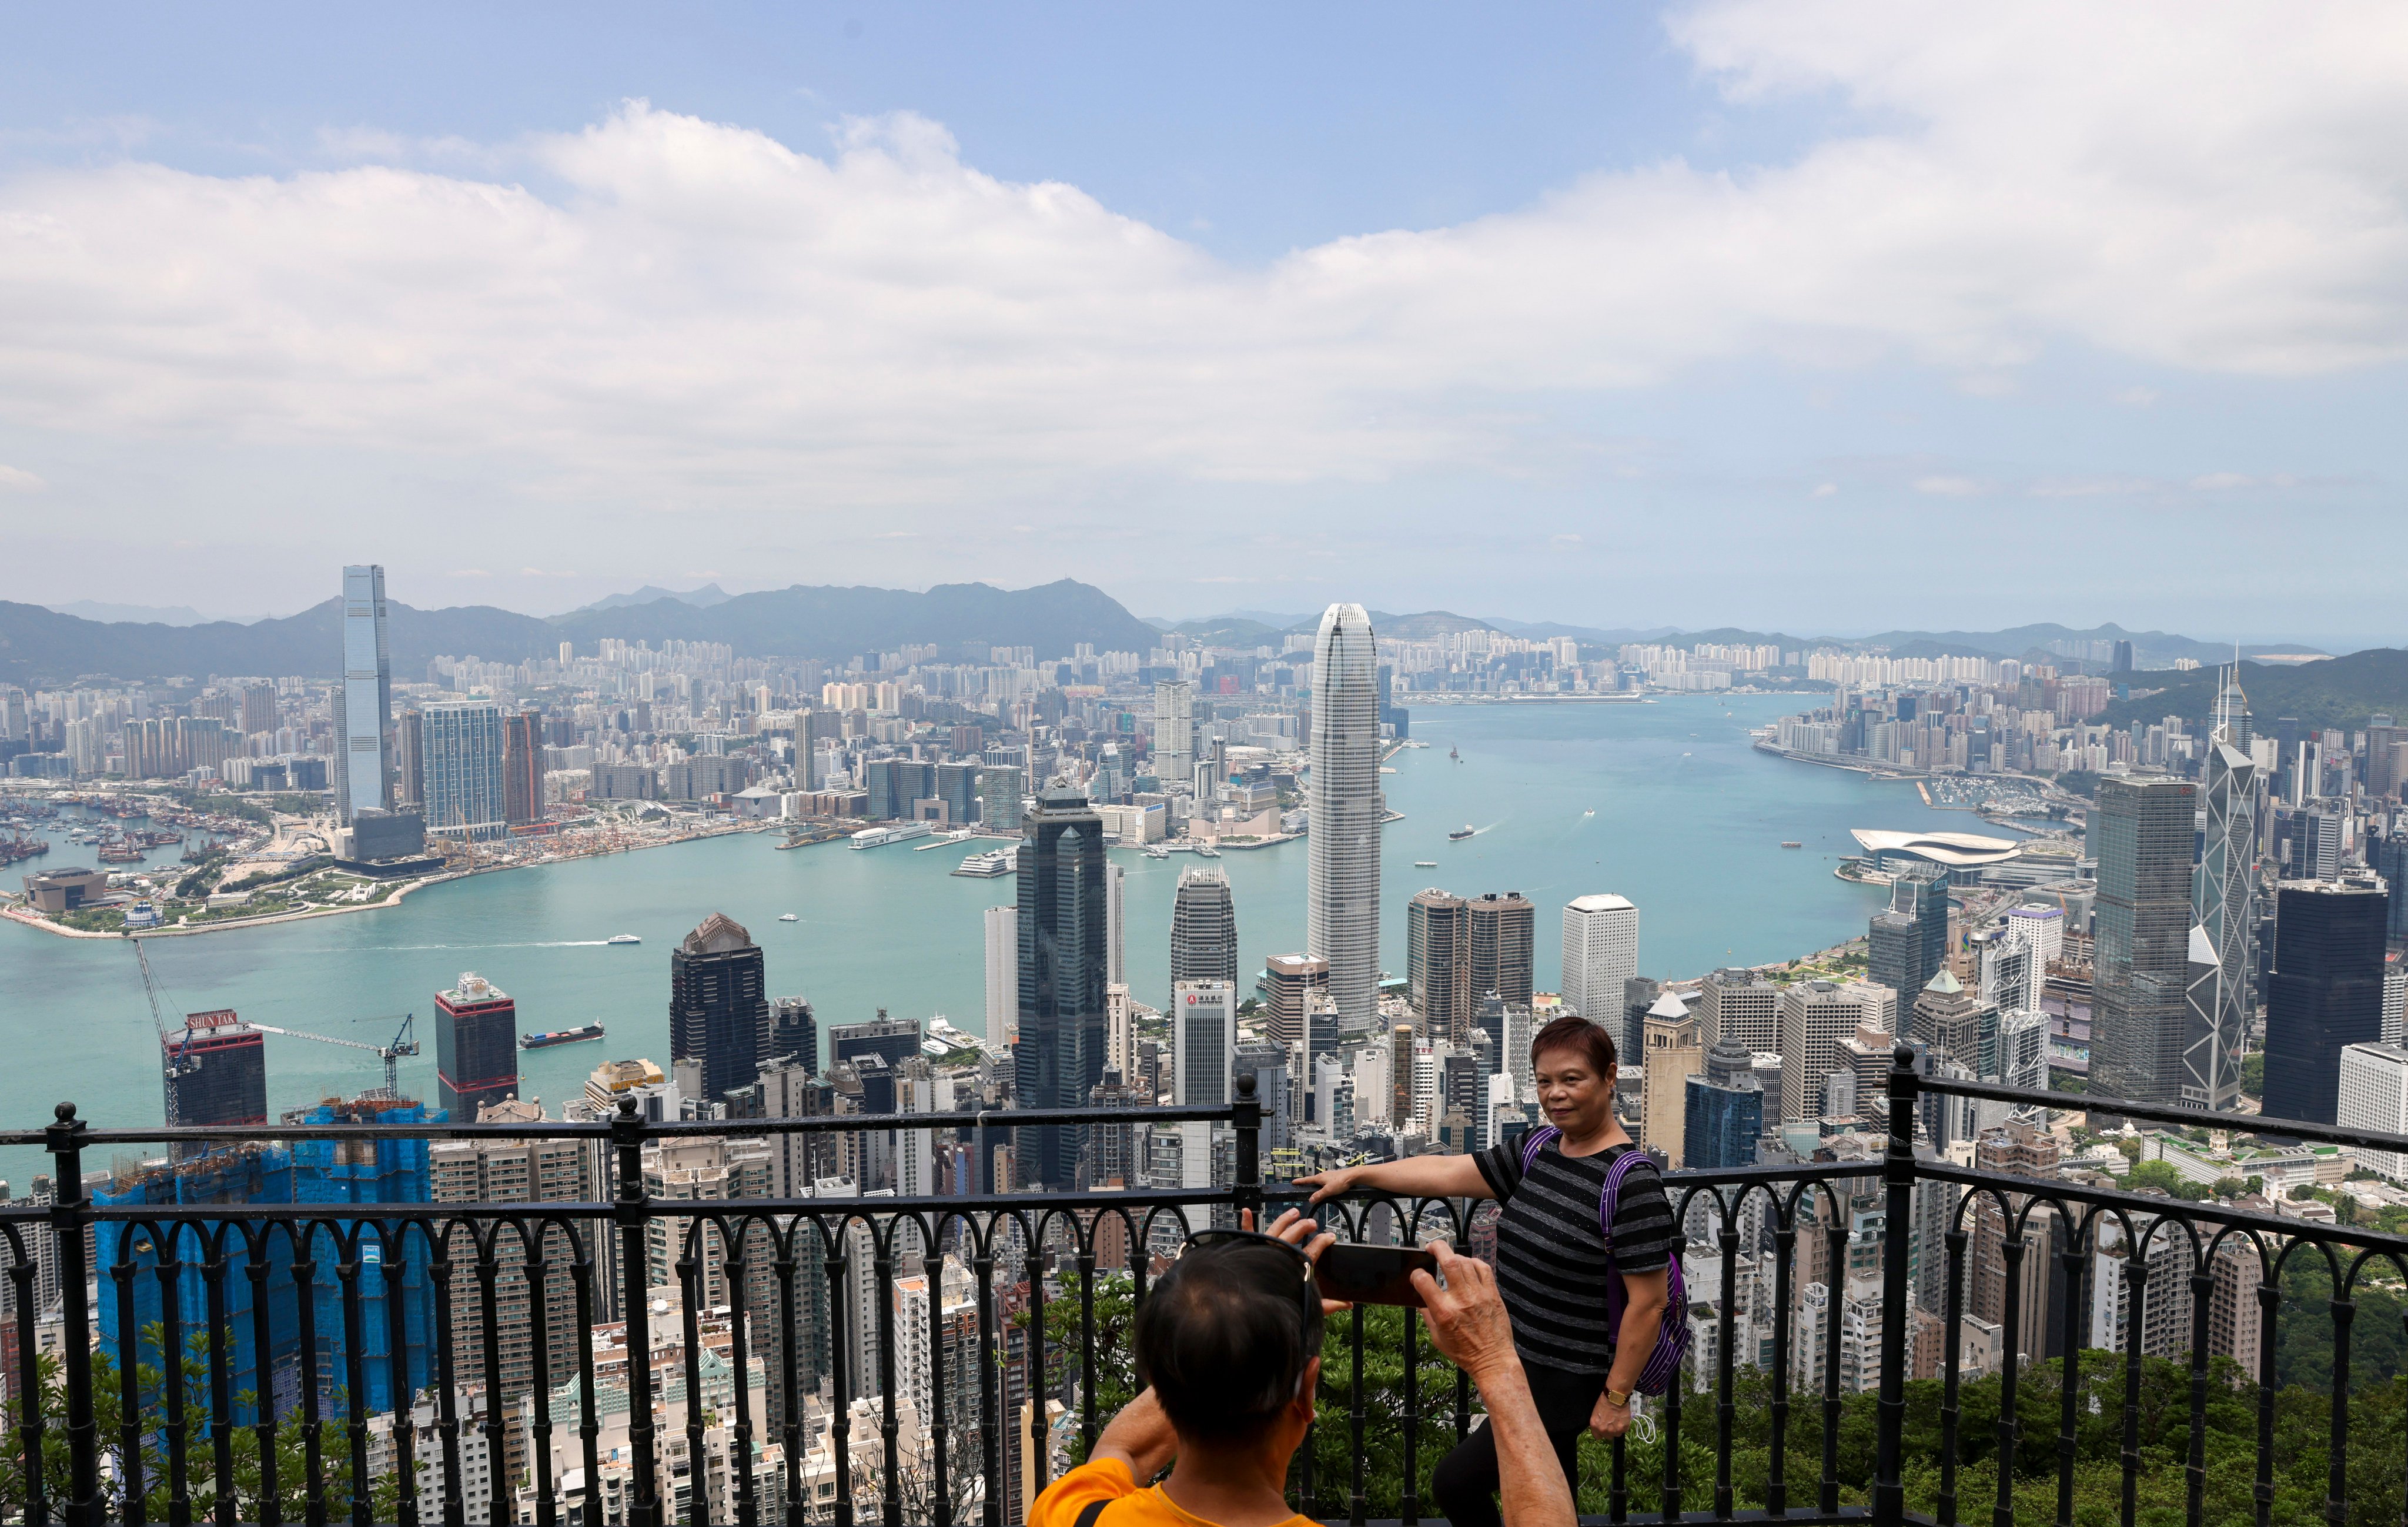 Hong Kong came in at No 2 in this year’s ranking after being dethroned by New York. Photo: K. Y. Cheng